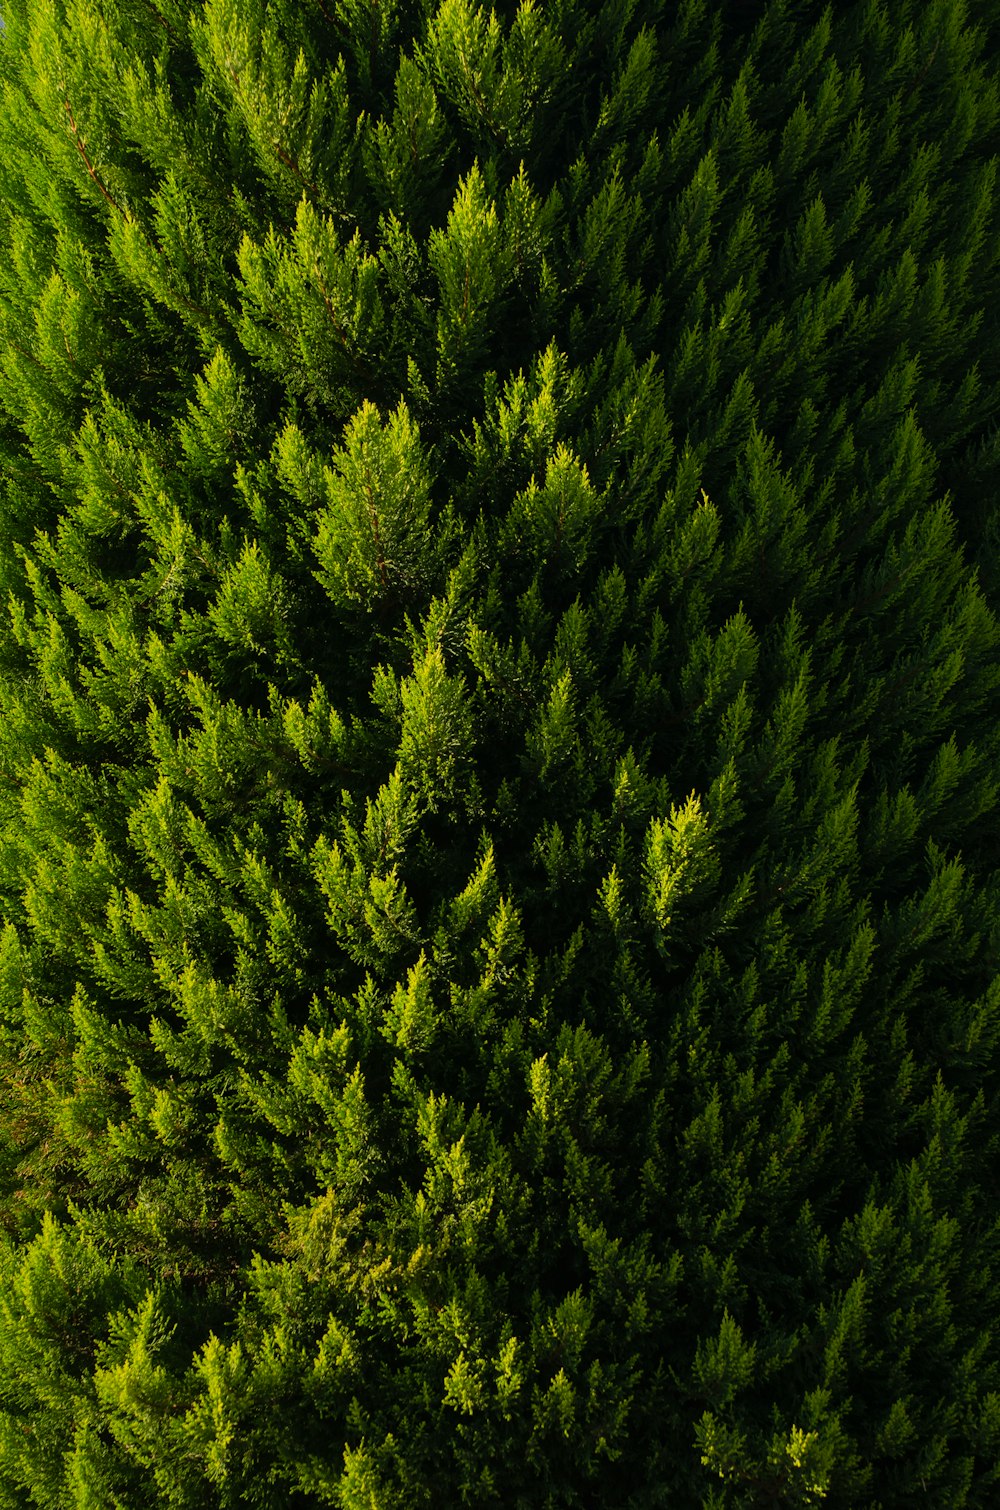 a large group of green trees in a forest